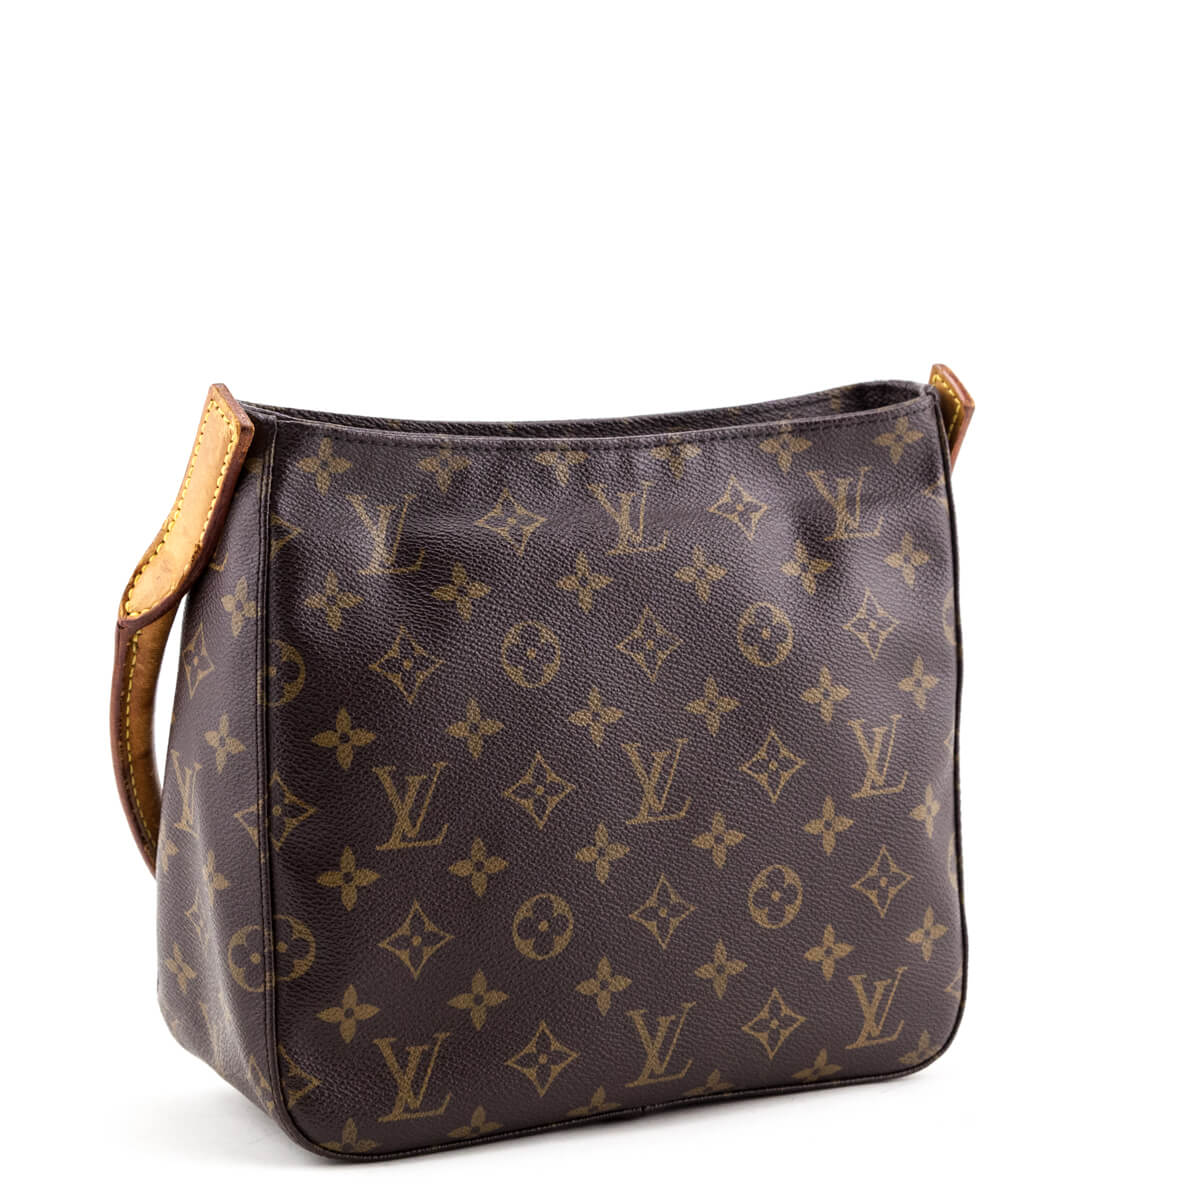 ❤️UPDATED REVIEW - Louis Vuitton Looping MM 